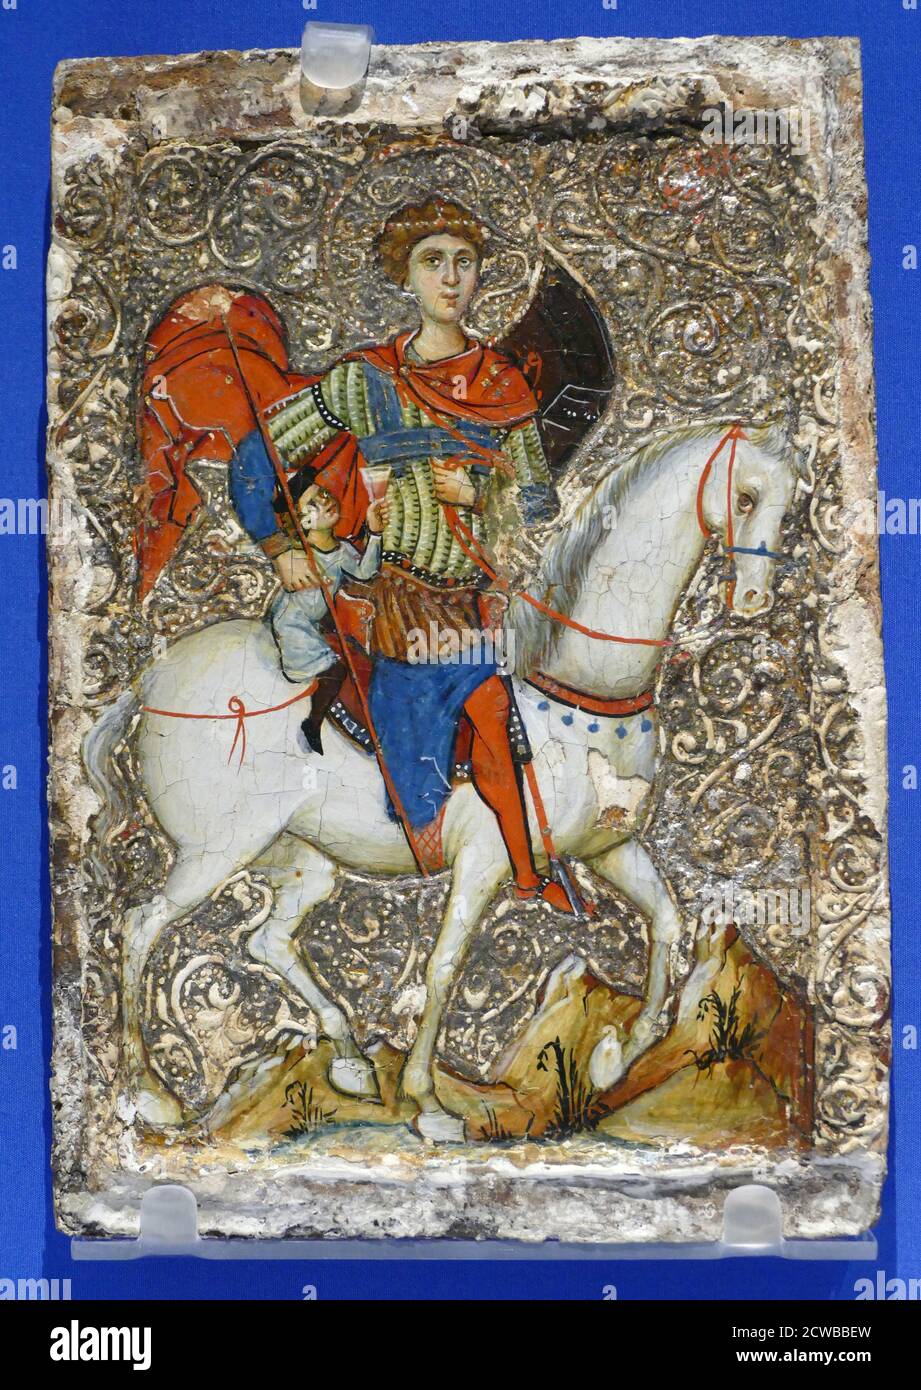 Byzantine icon depicting St George an the youth of Mytilene rescued from slavery by st George. Egg tempura, pine and gesso. 1250 AD Stock Photo